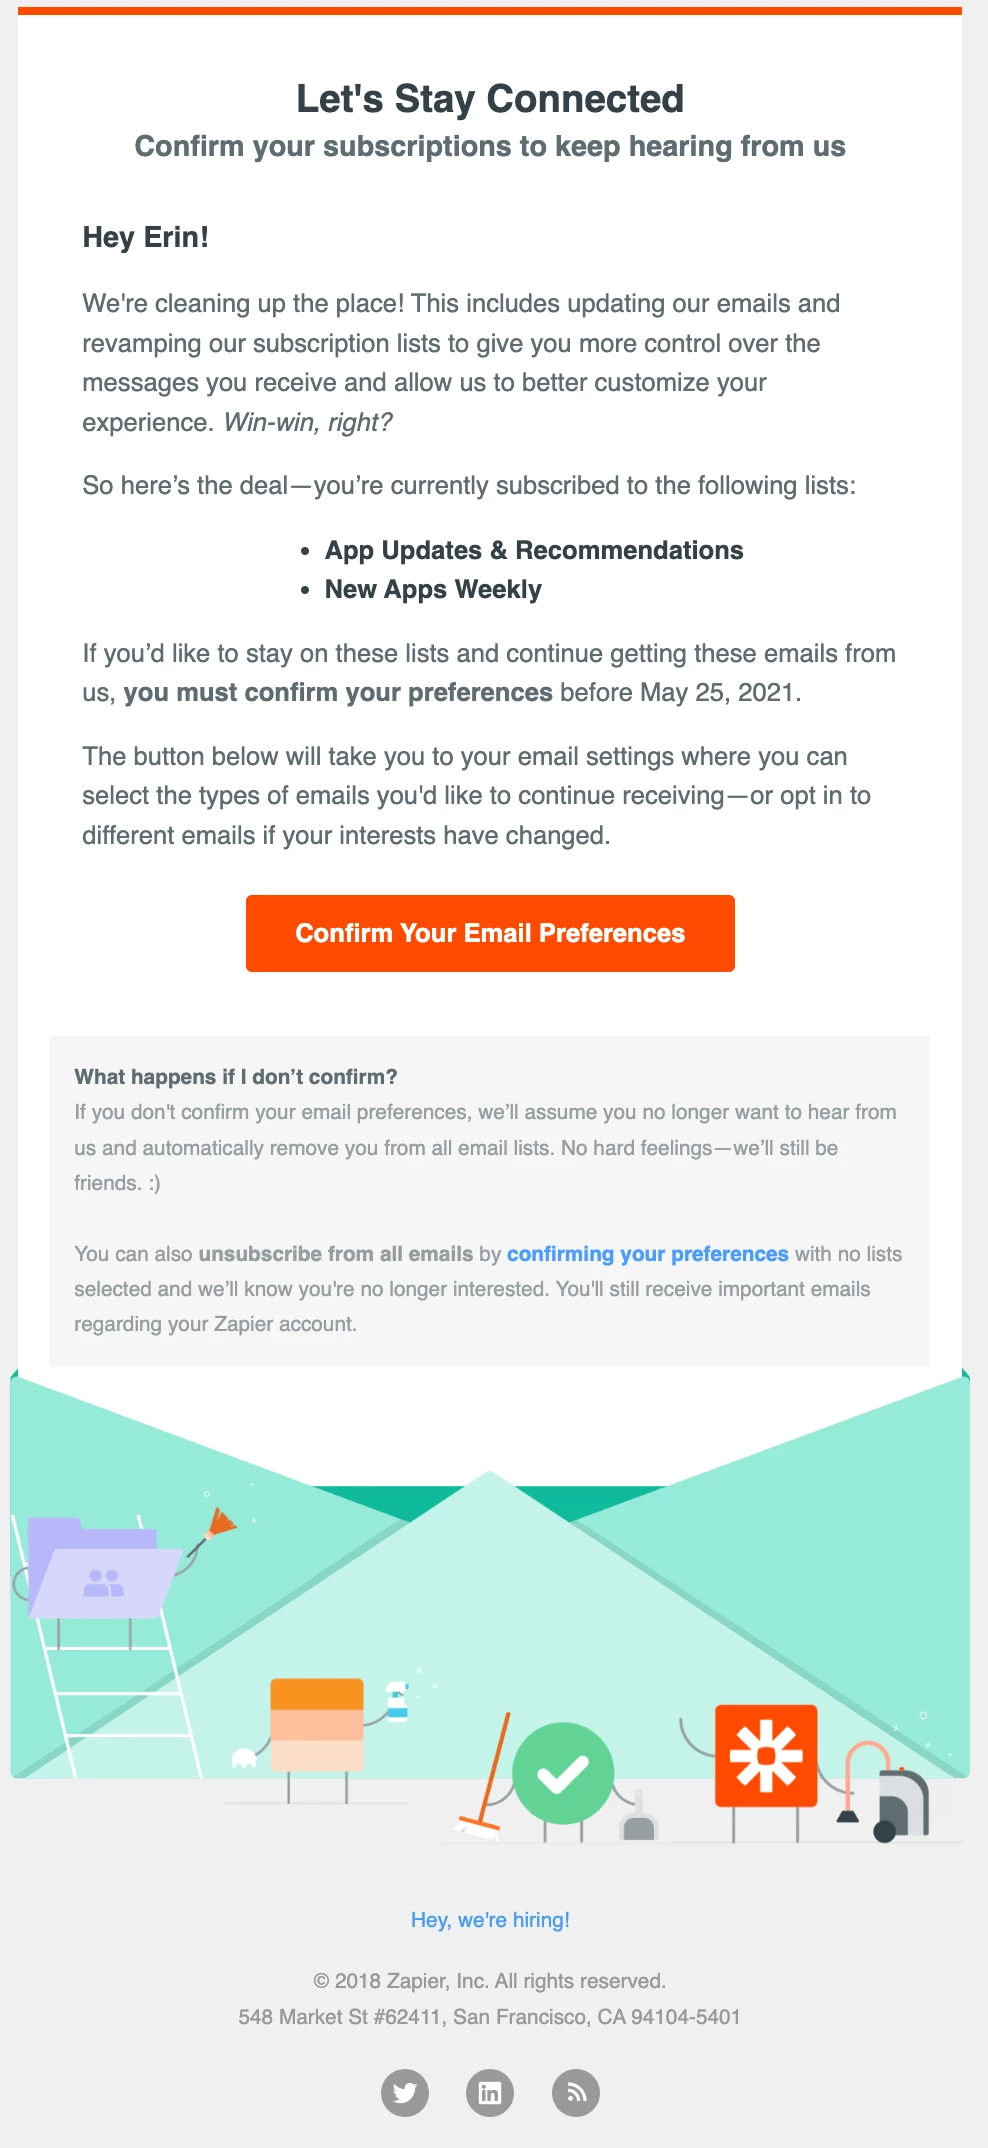 Email preference example from Zapier's re-engagement campaign